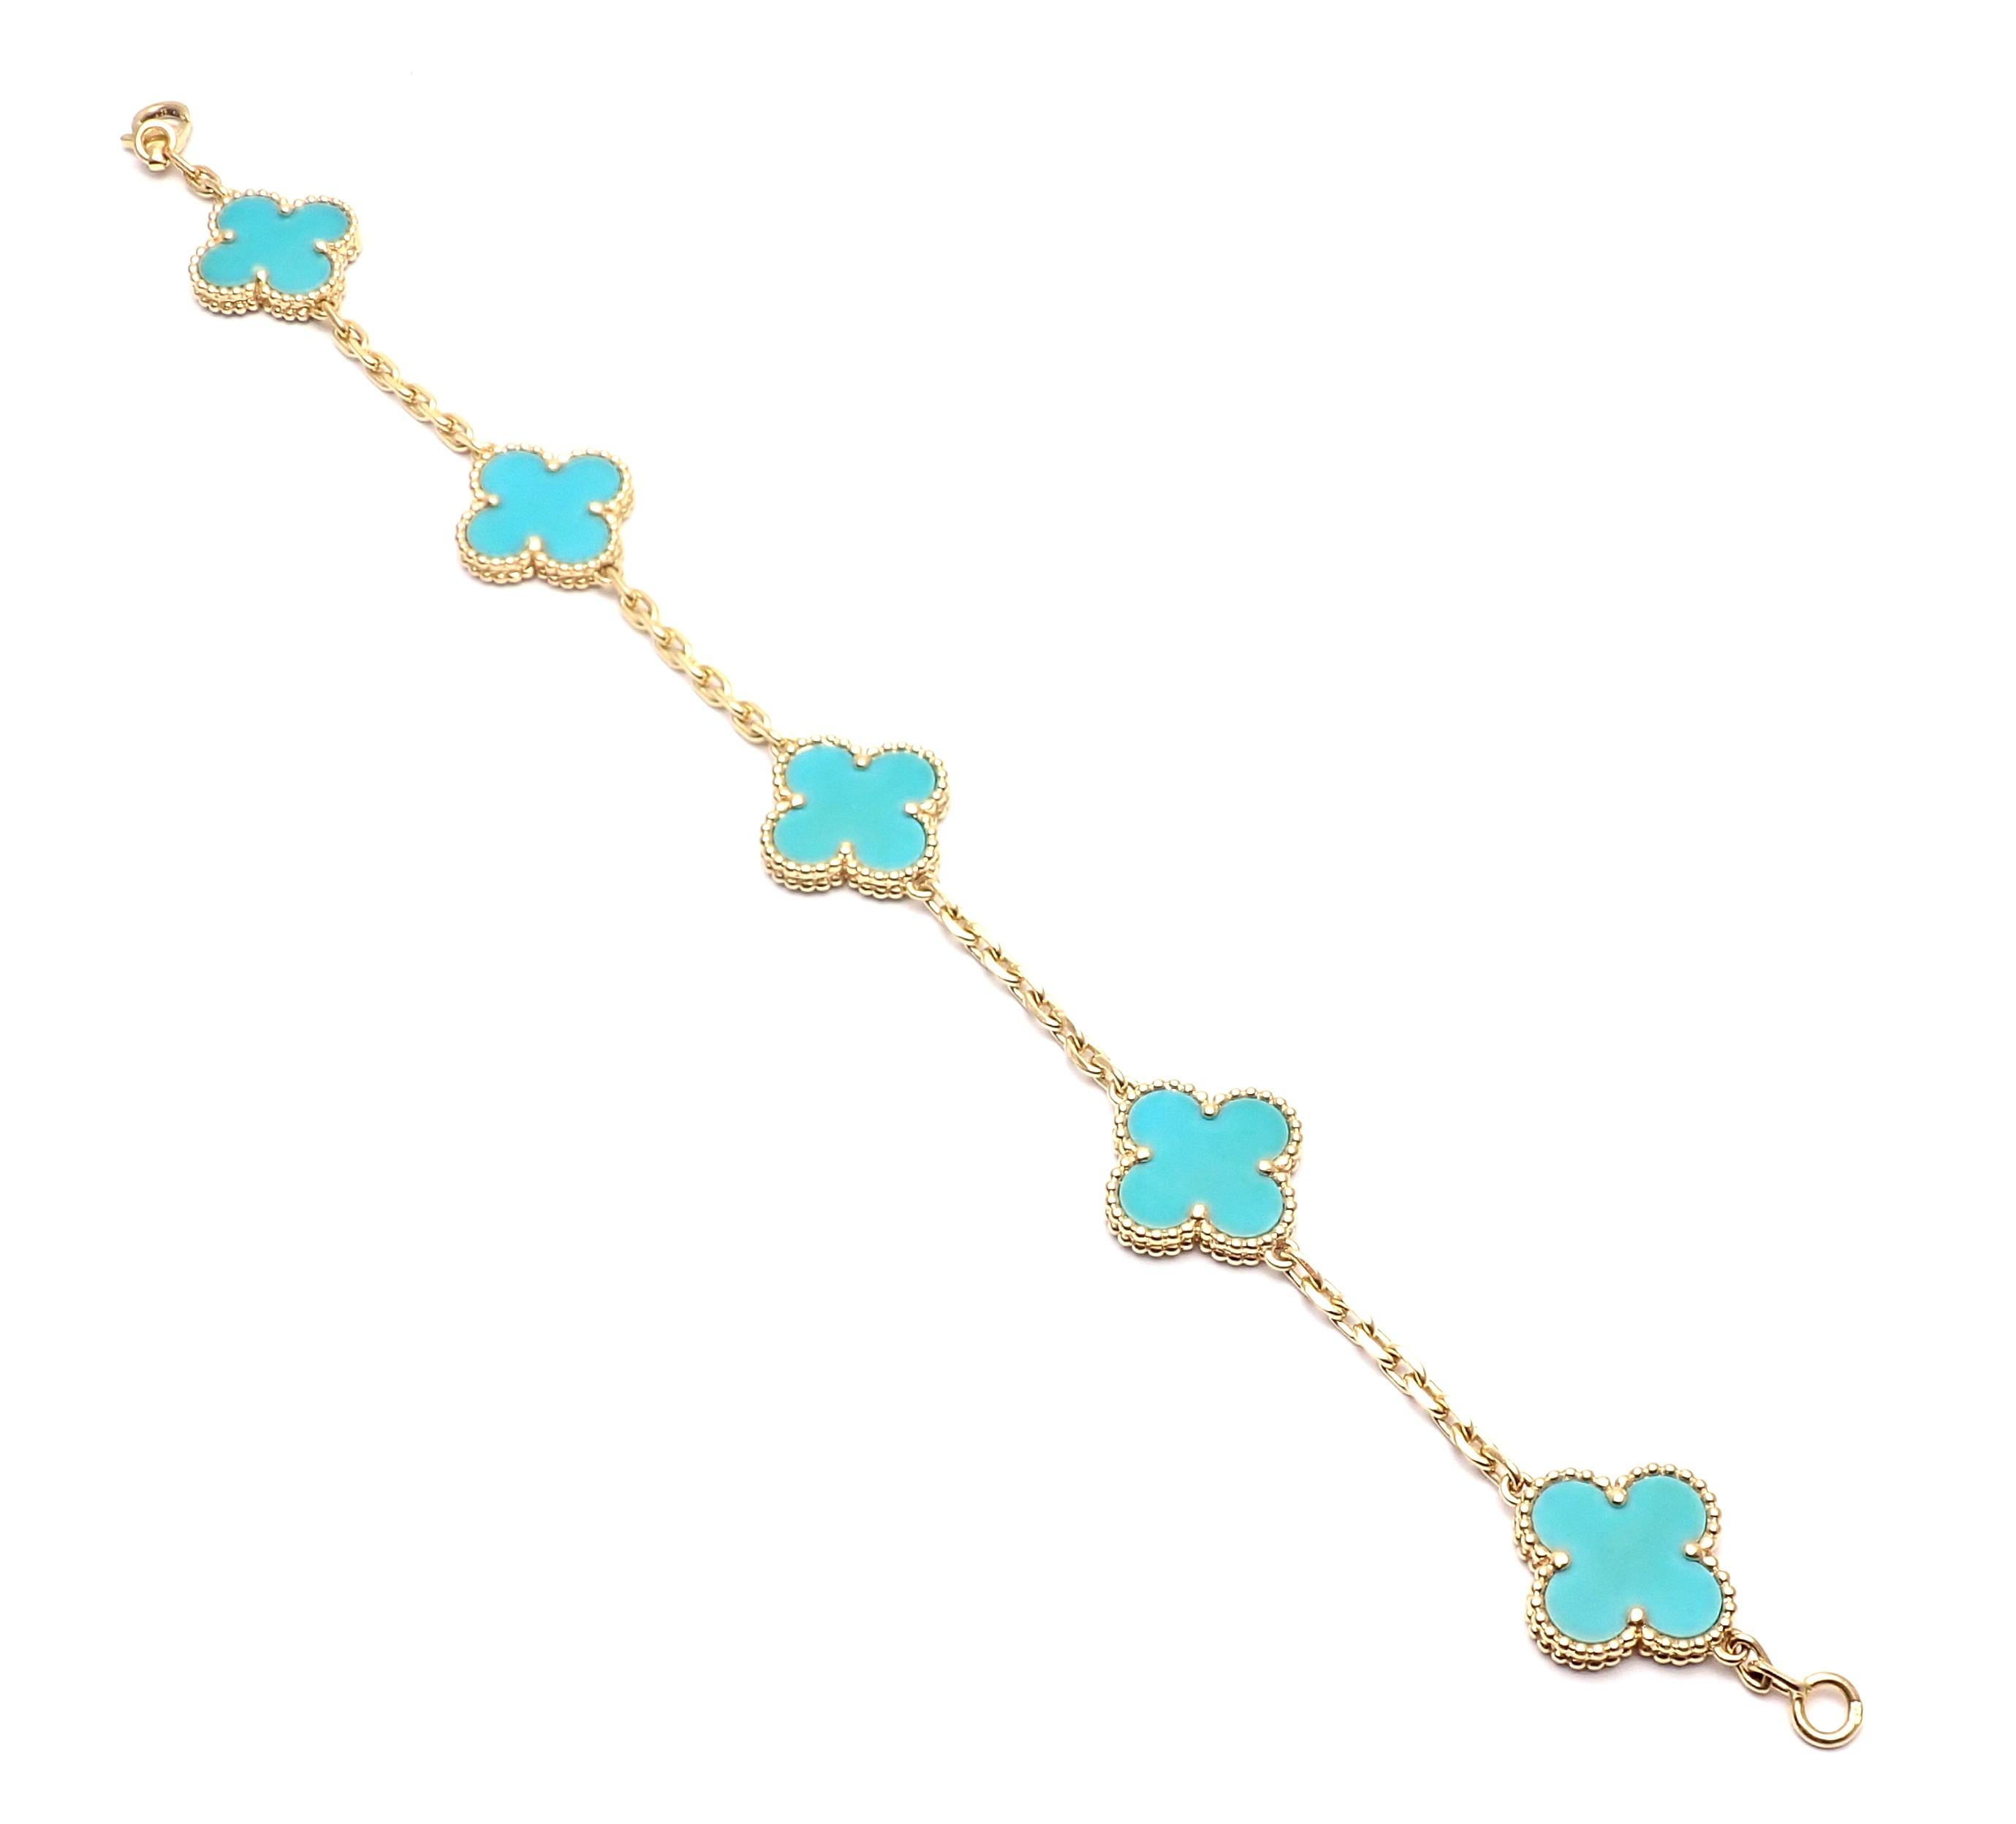 18k Yellow Gold Vintage Turquoise Alhambra Bracelet from Van Cleef & Arpels.  
With 5 alhambra shape turquoise stones. 
Details:  
Length: 7.5'' 
Weight: 10.9 grams 
Stamped Hallmarks: VCA 750 JB151197
*Free Shipping within the United States*  
YOUR